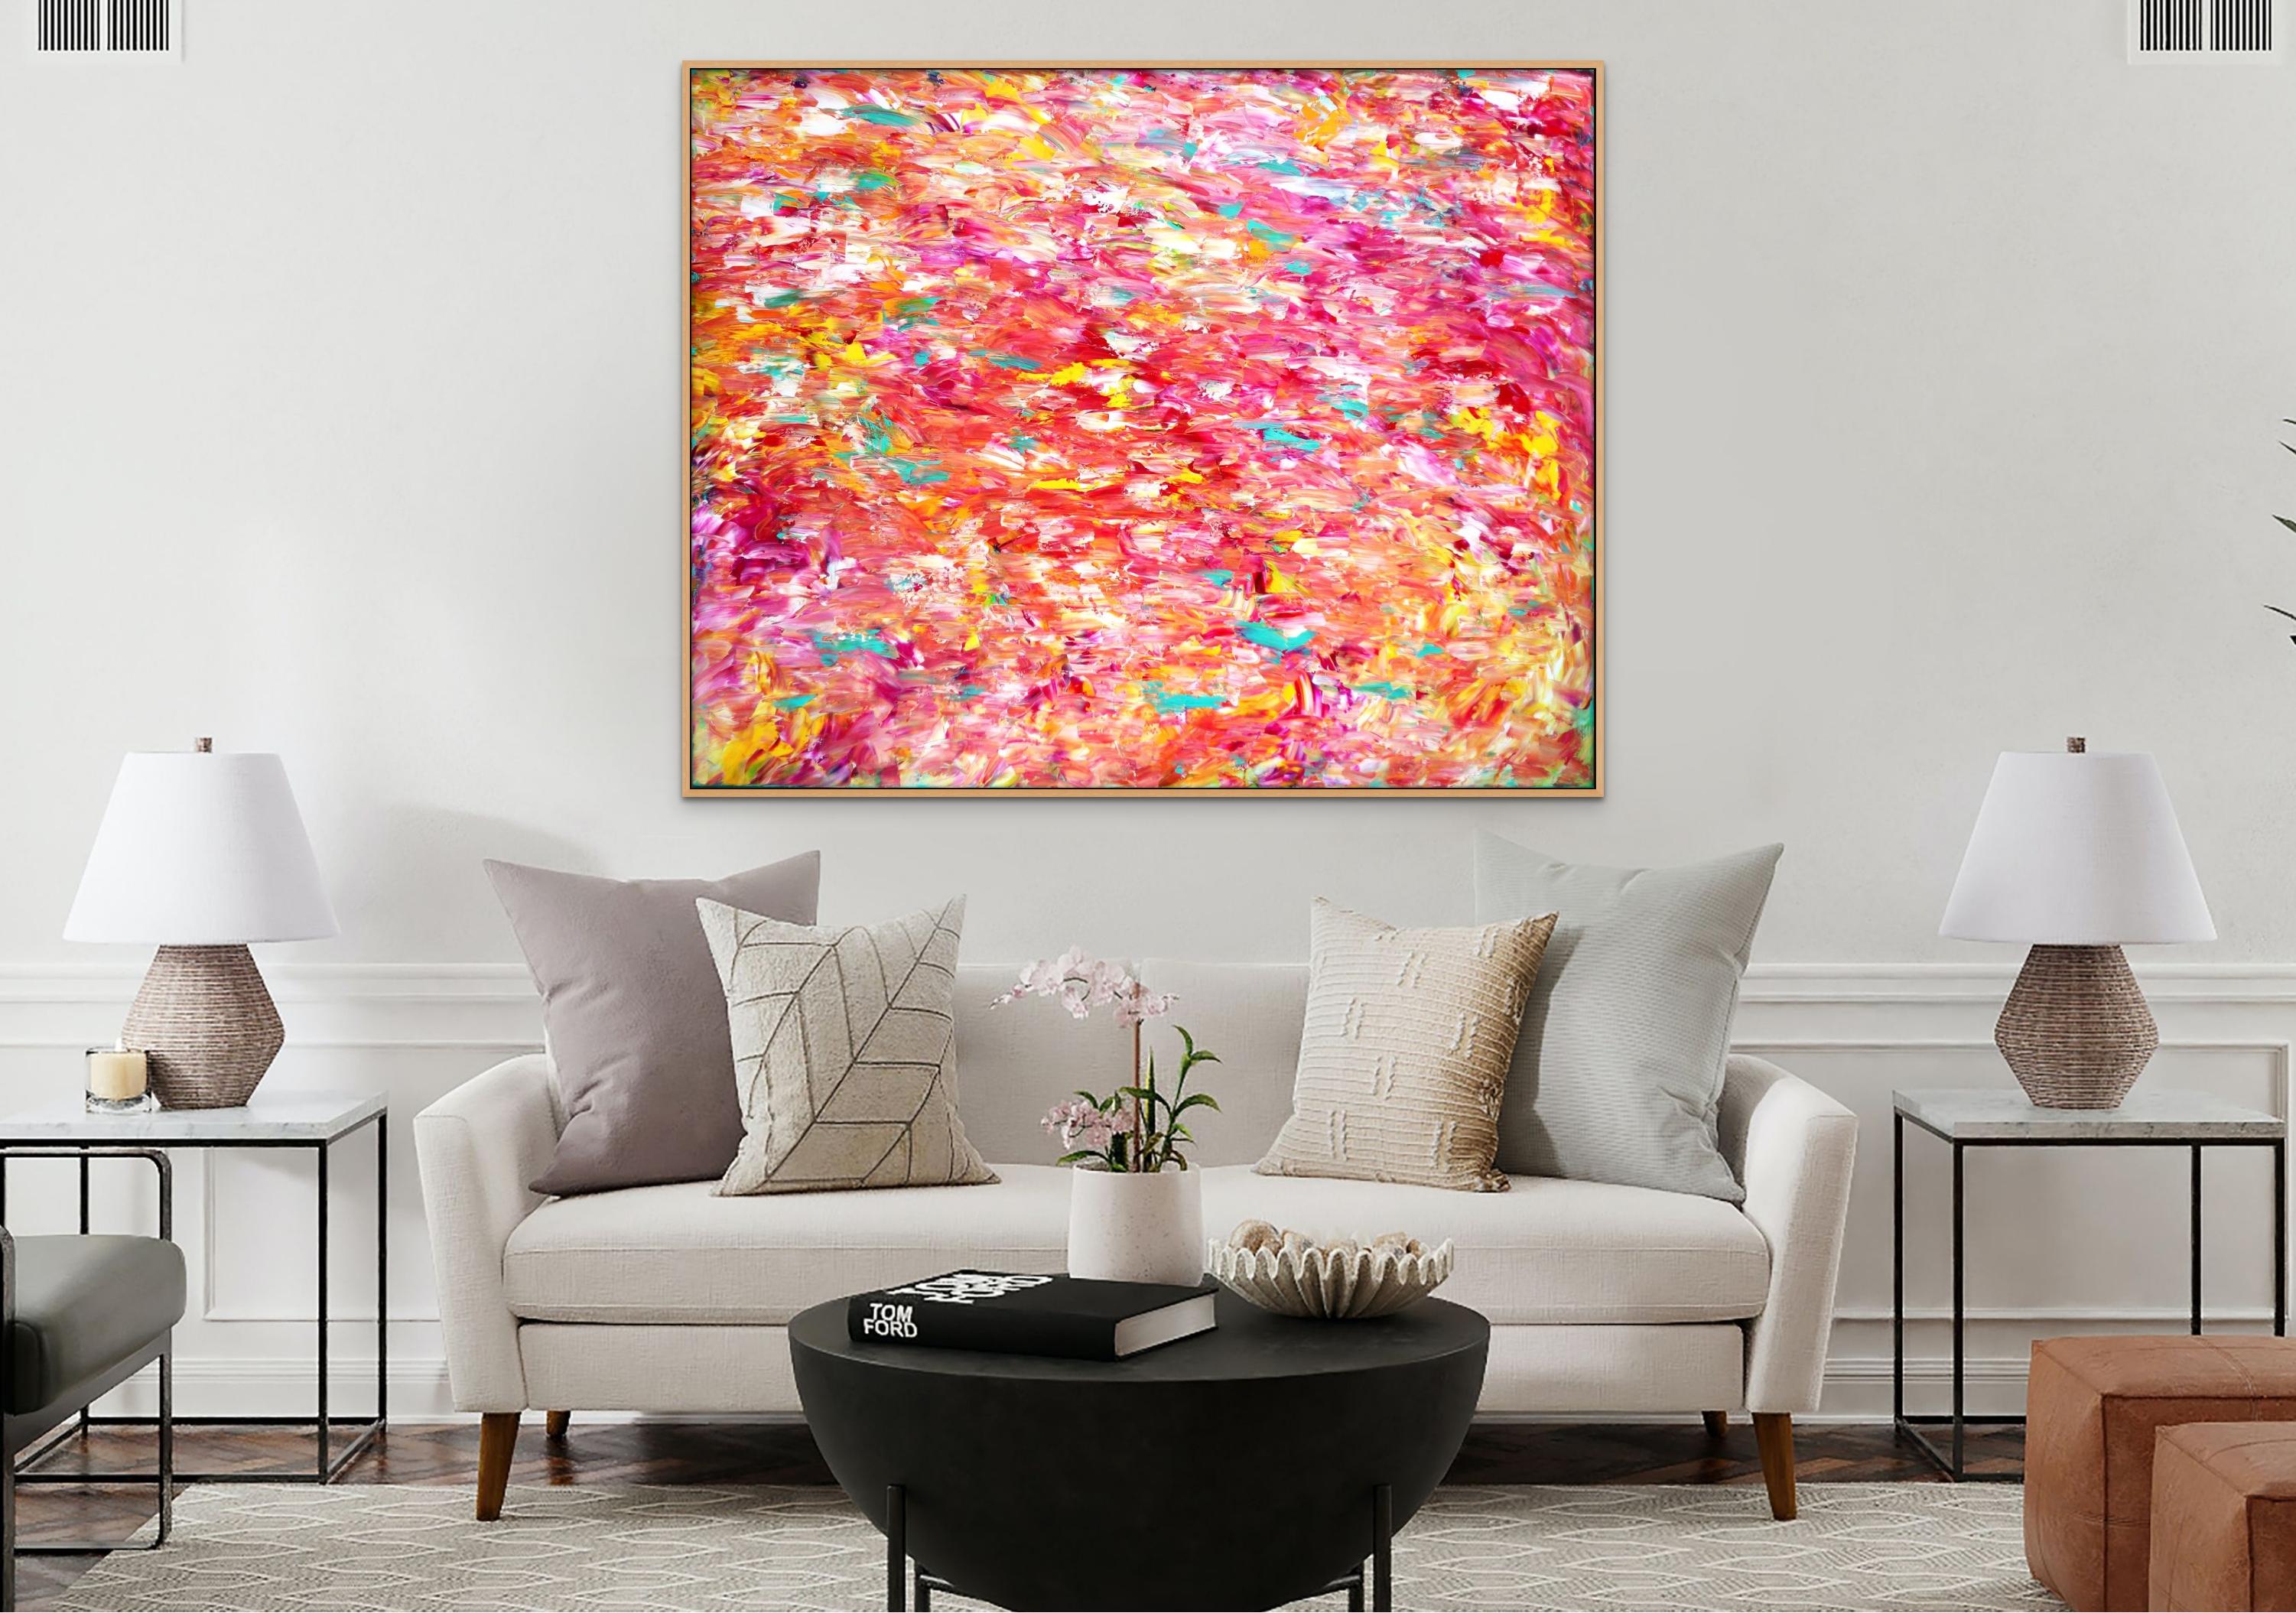 Fire Lake - Abstract Expressionist Painting by Estelle Asmodelle